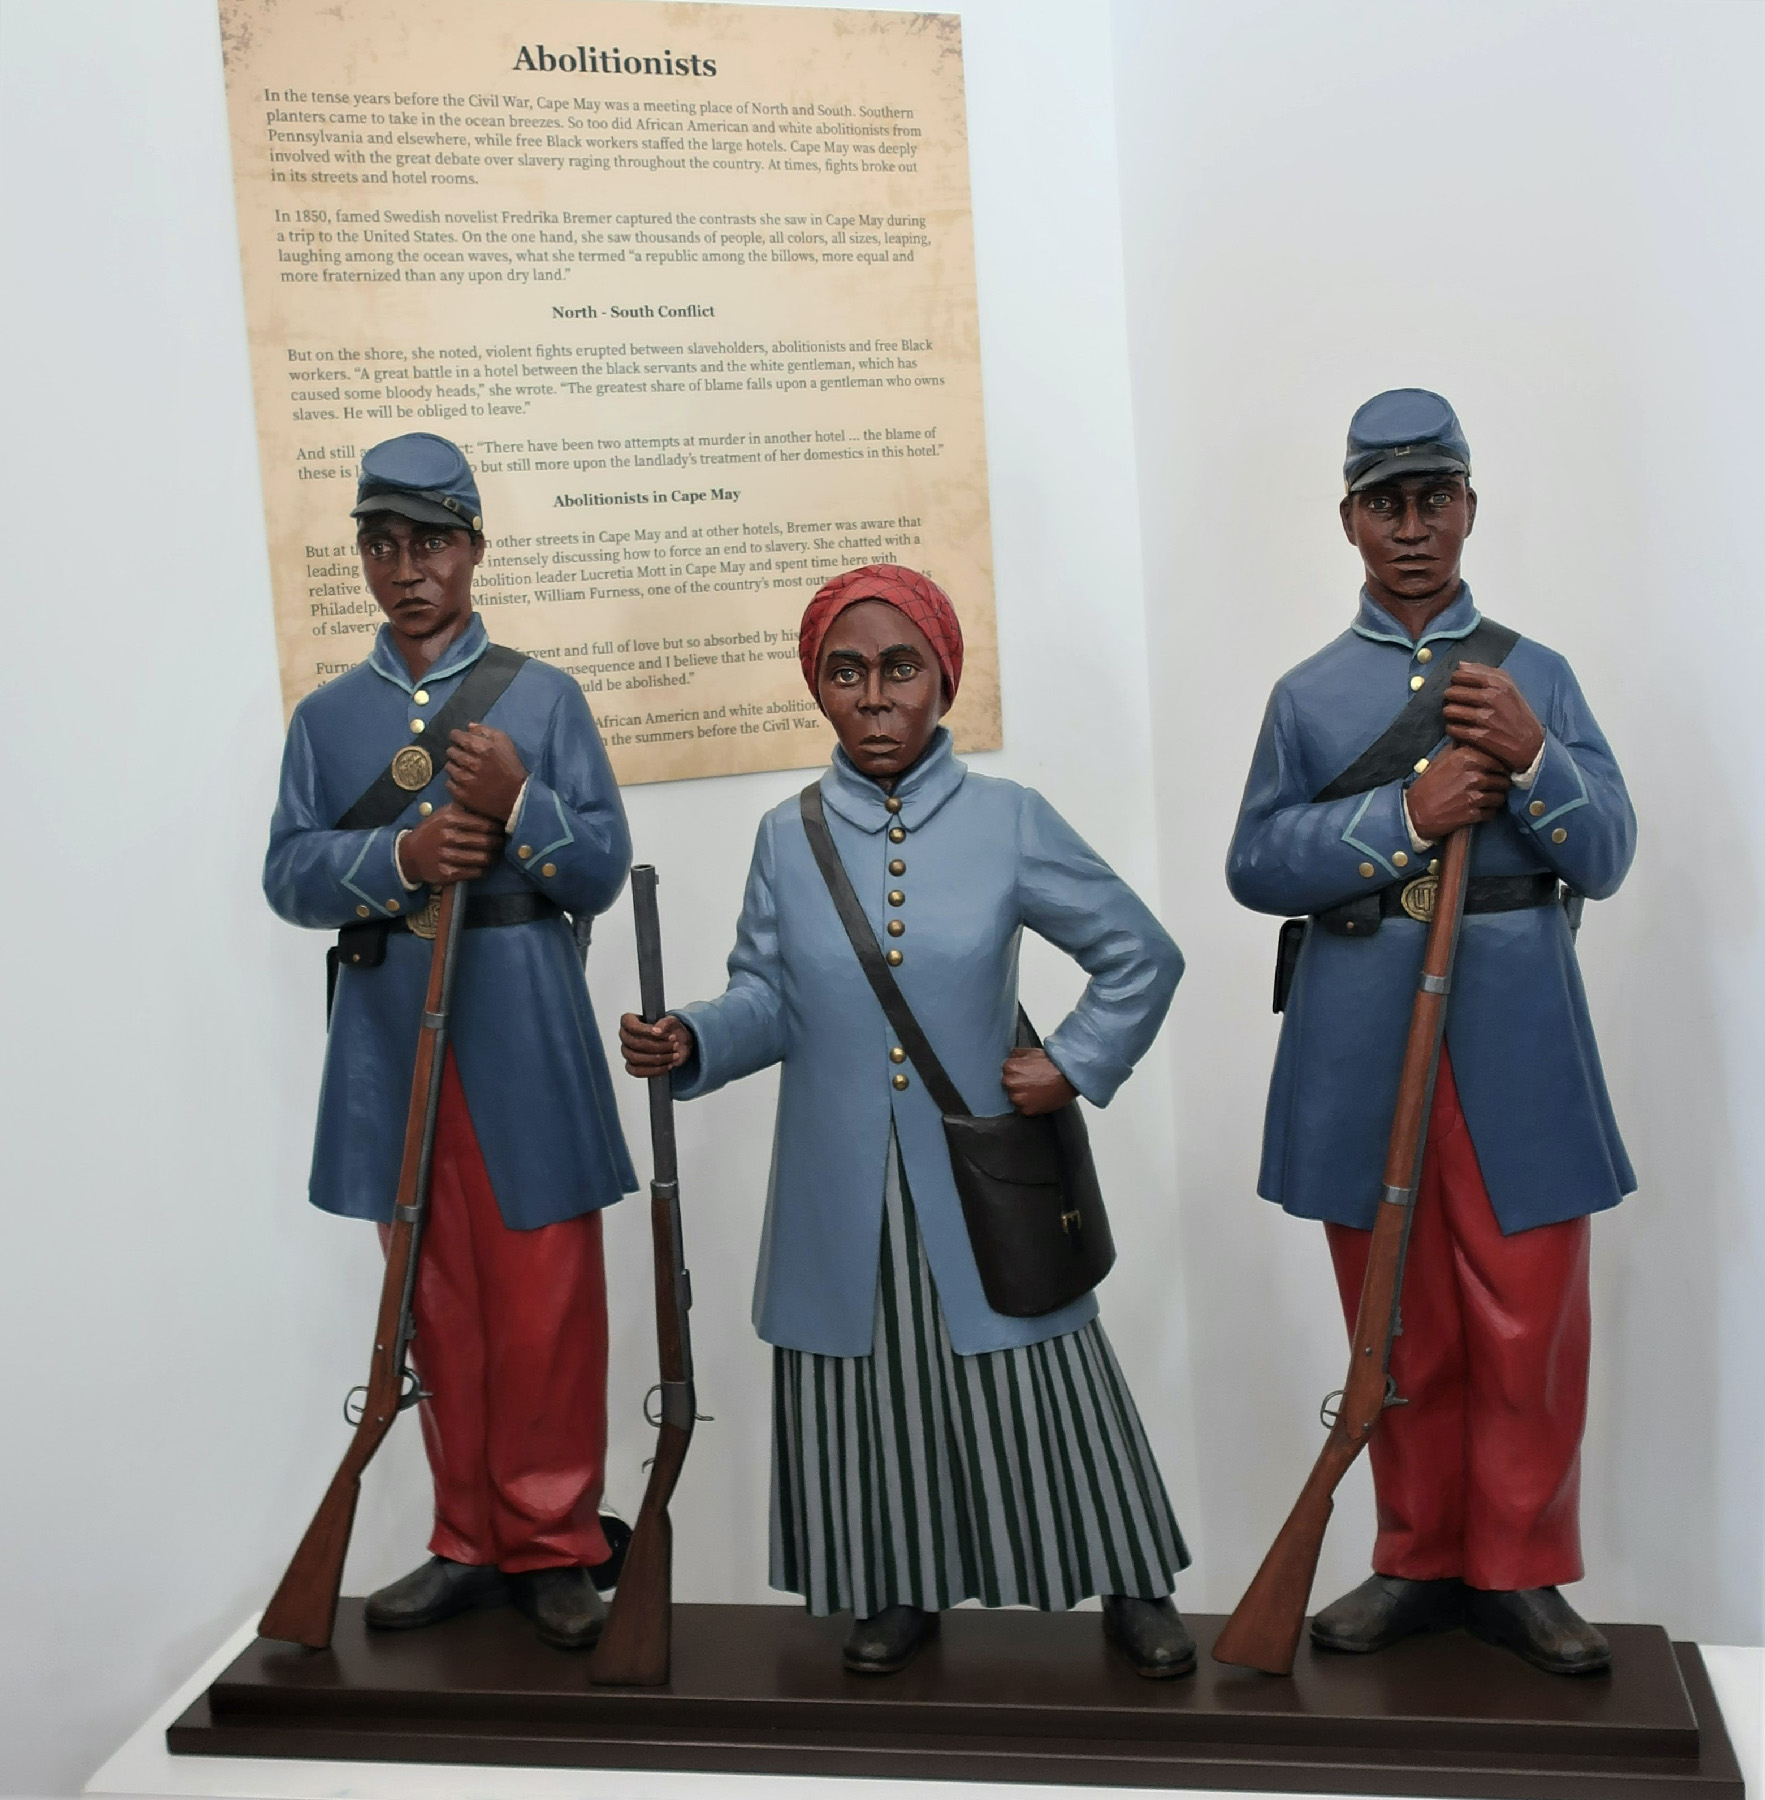 Figures at the Harriet Tubman Museum in Cape May, New Jersey, help tell the story of this heroic woman’s role in the Underground Railroad.